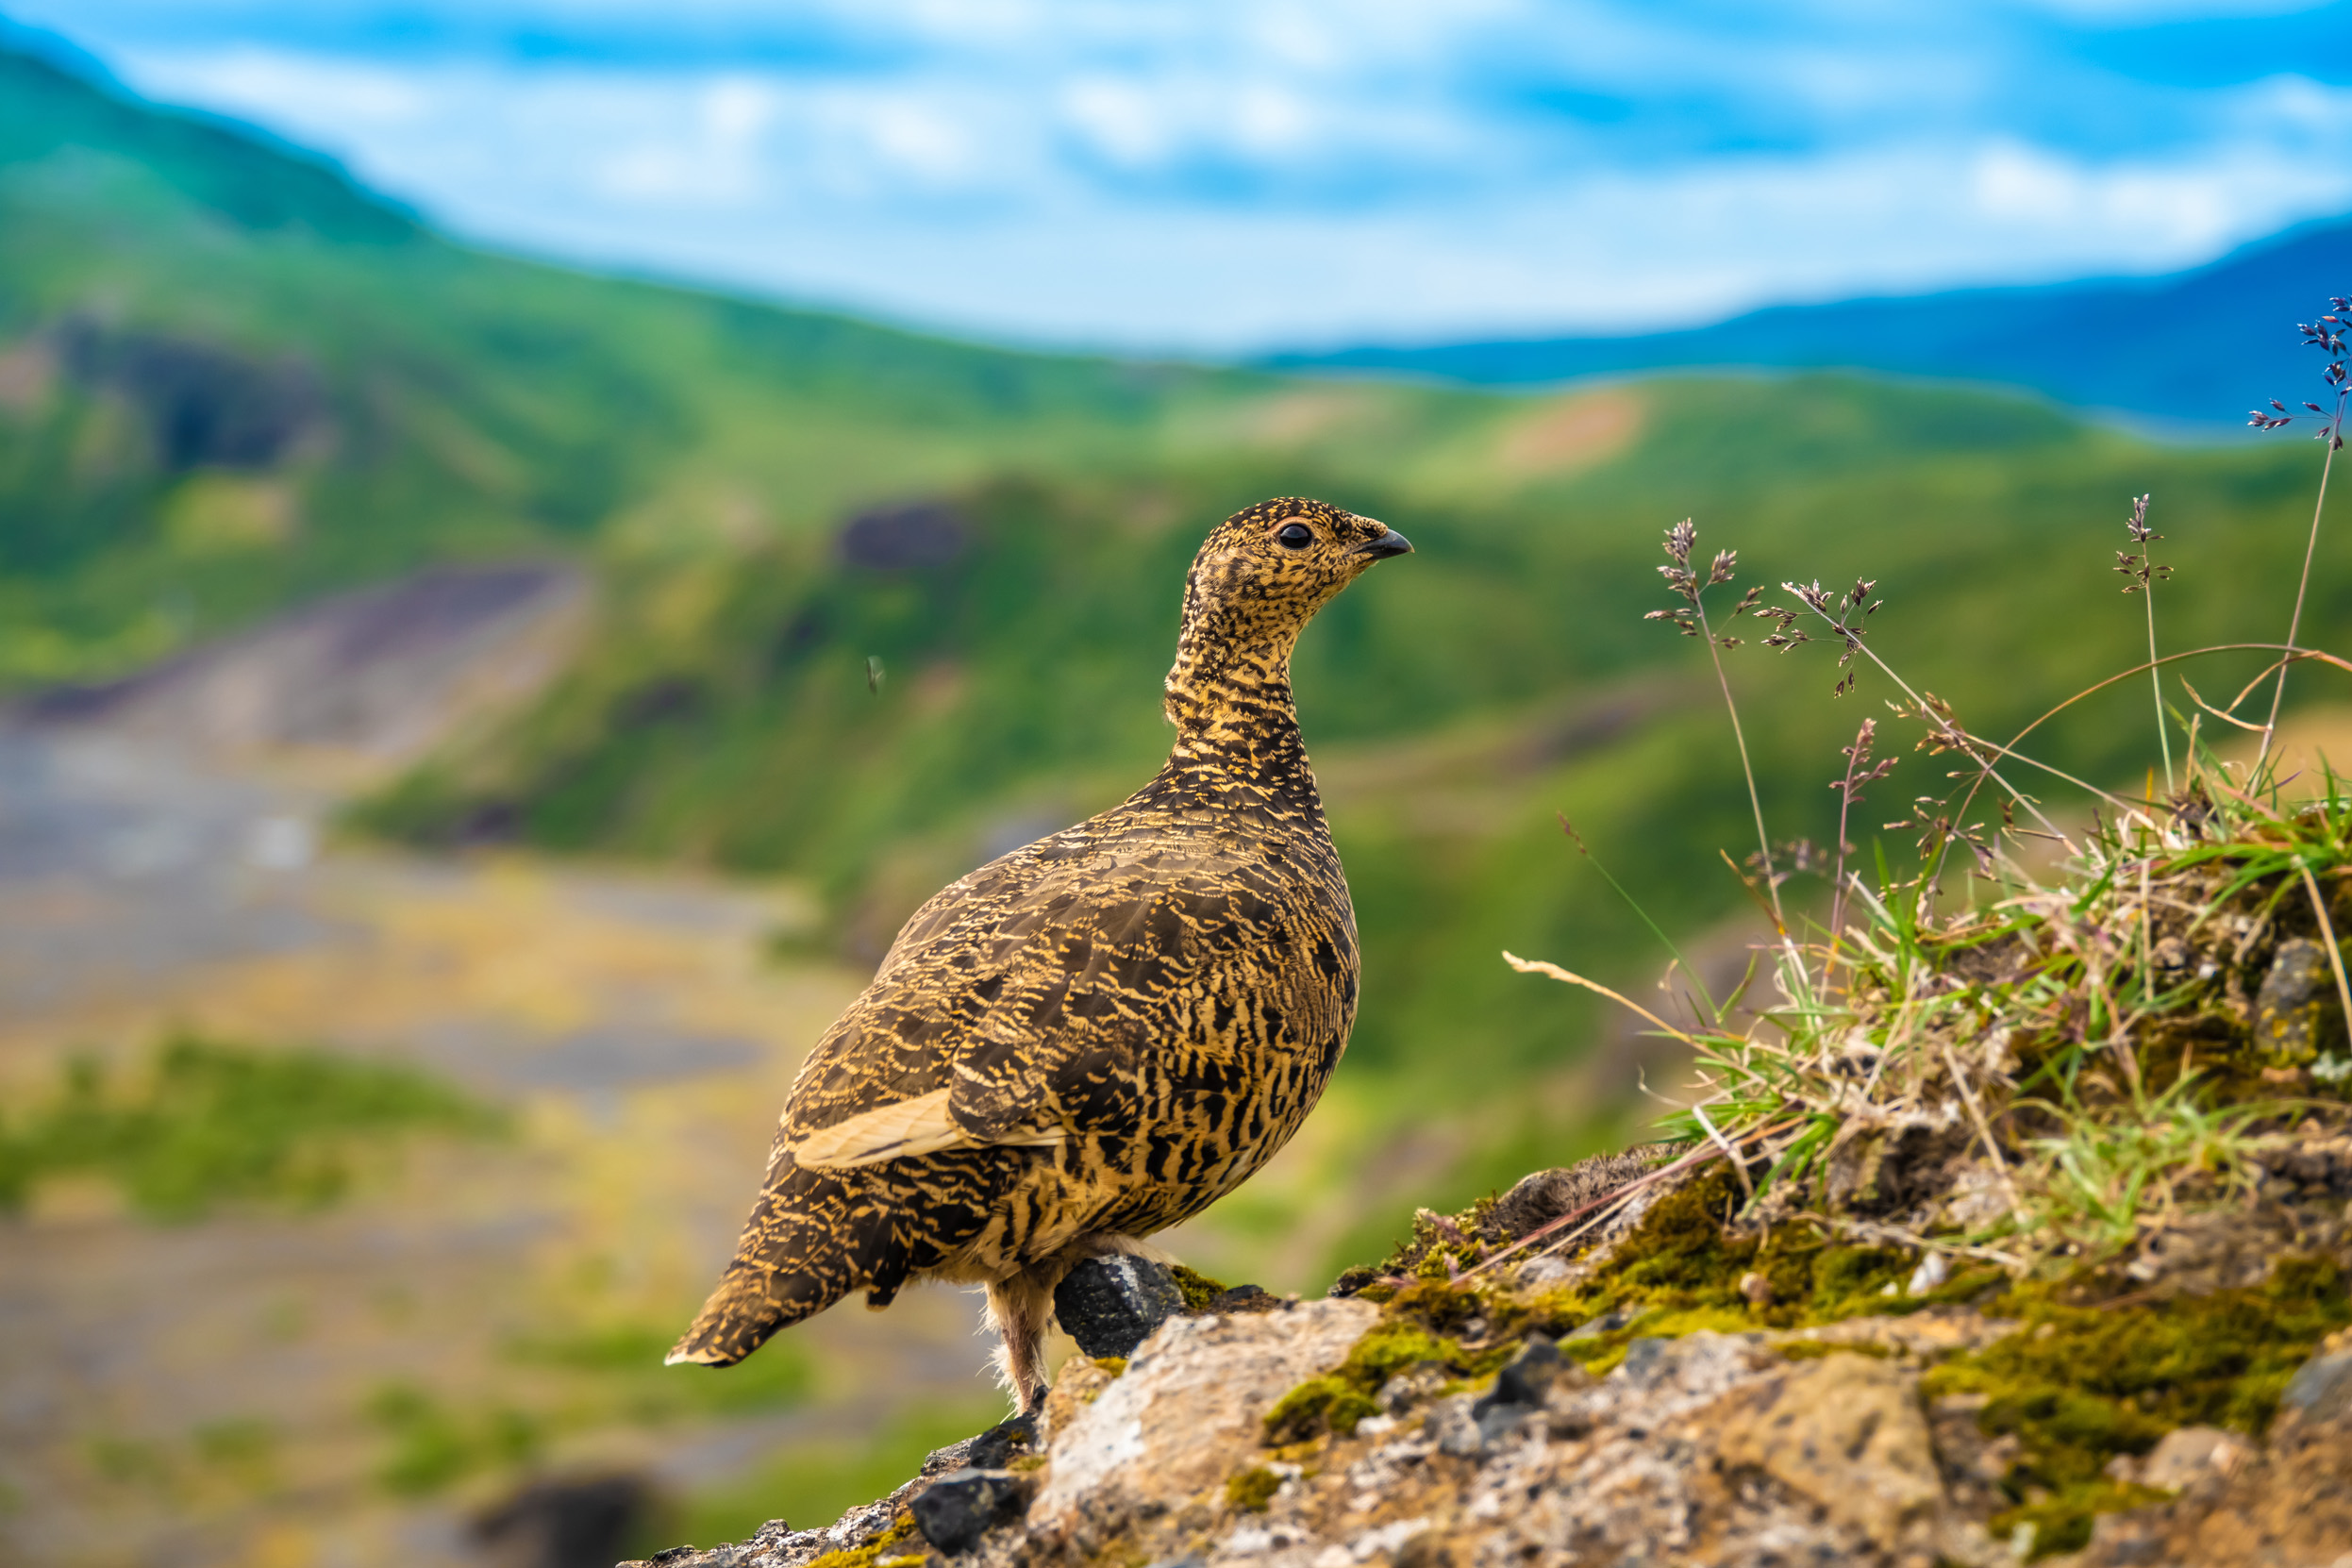 A lone Ptarmigan in summer plumage stood on a grass covered rock with mountains in the background.